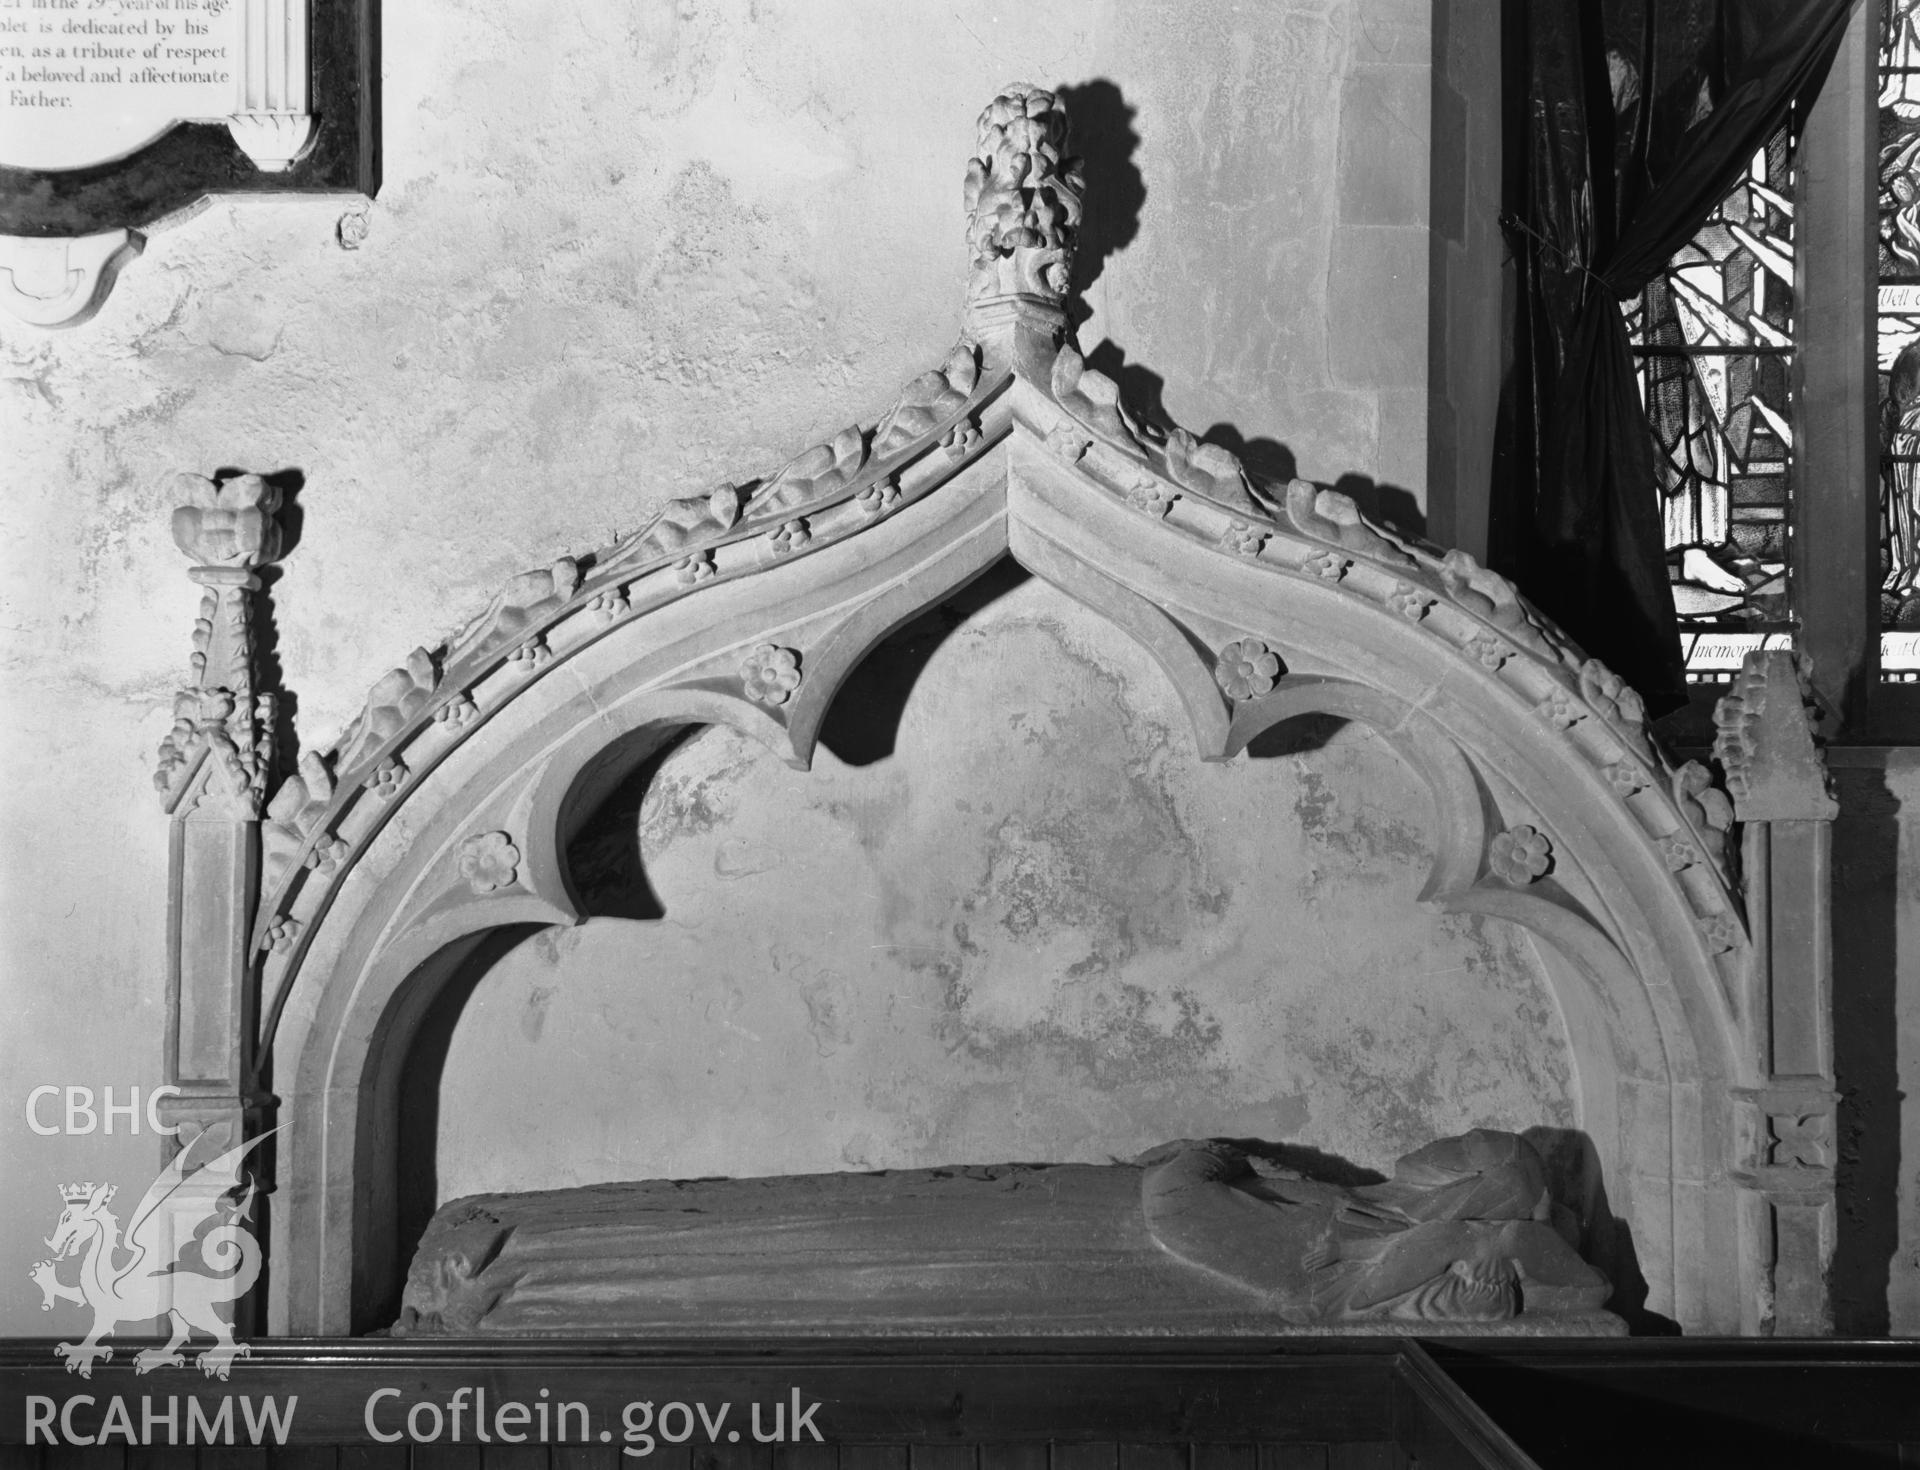 View of effigy in the north aisle in St Marys Church, Tenby in 08.19.1941.